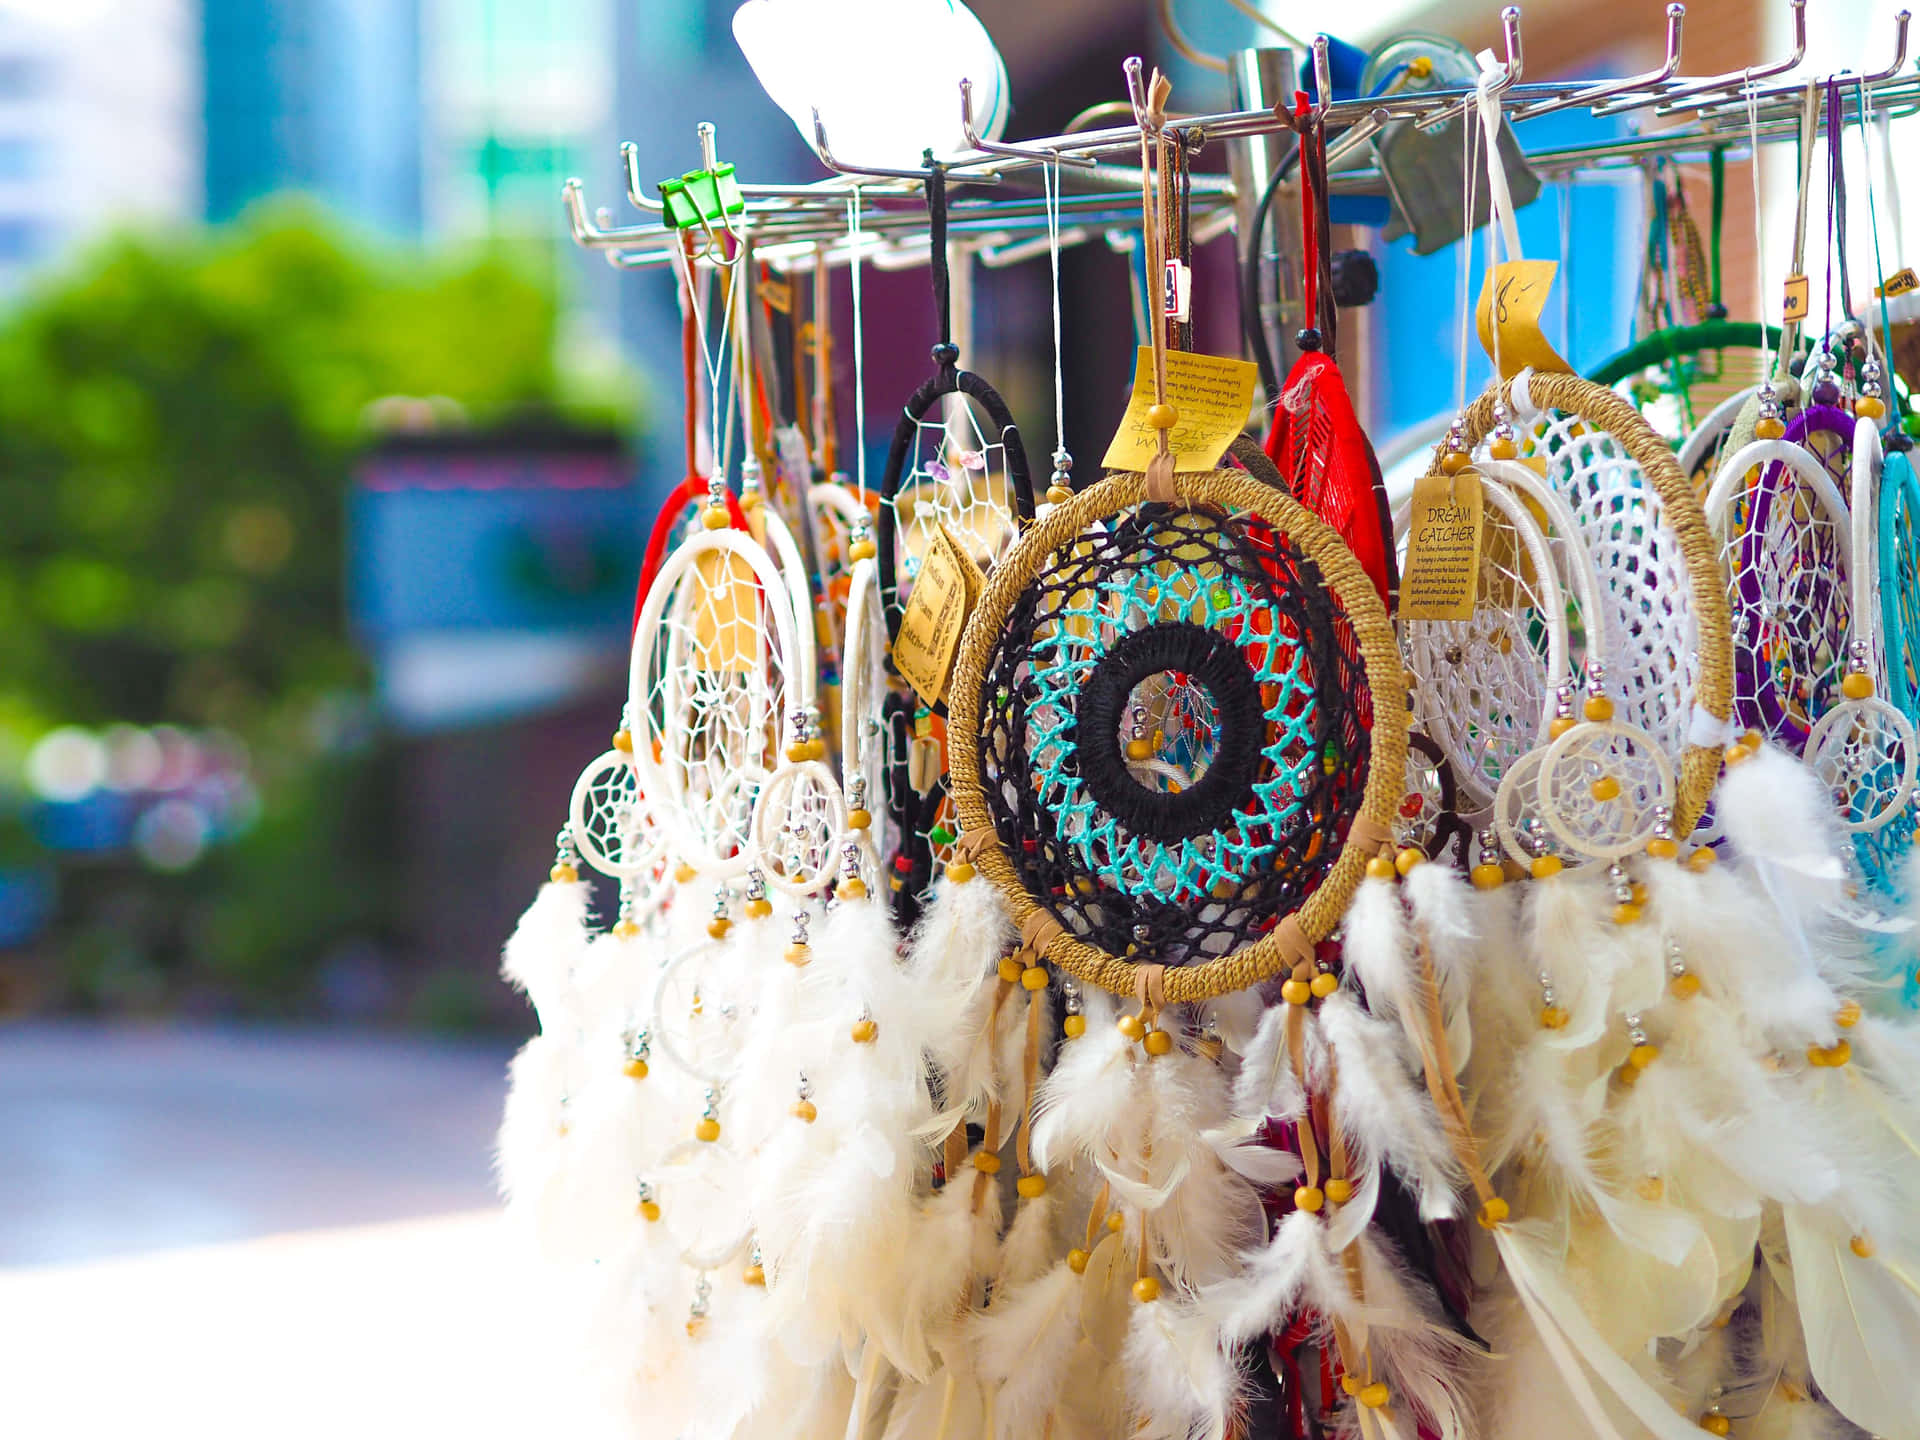 A Display Of Dream Catchers